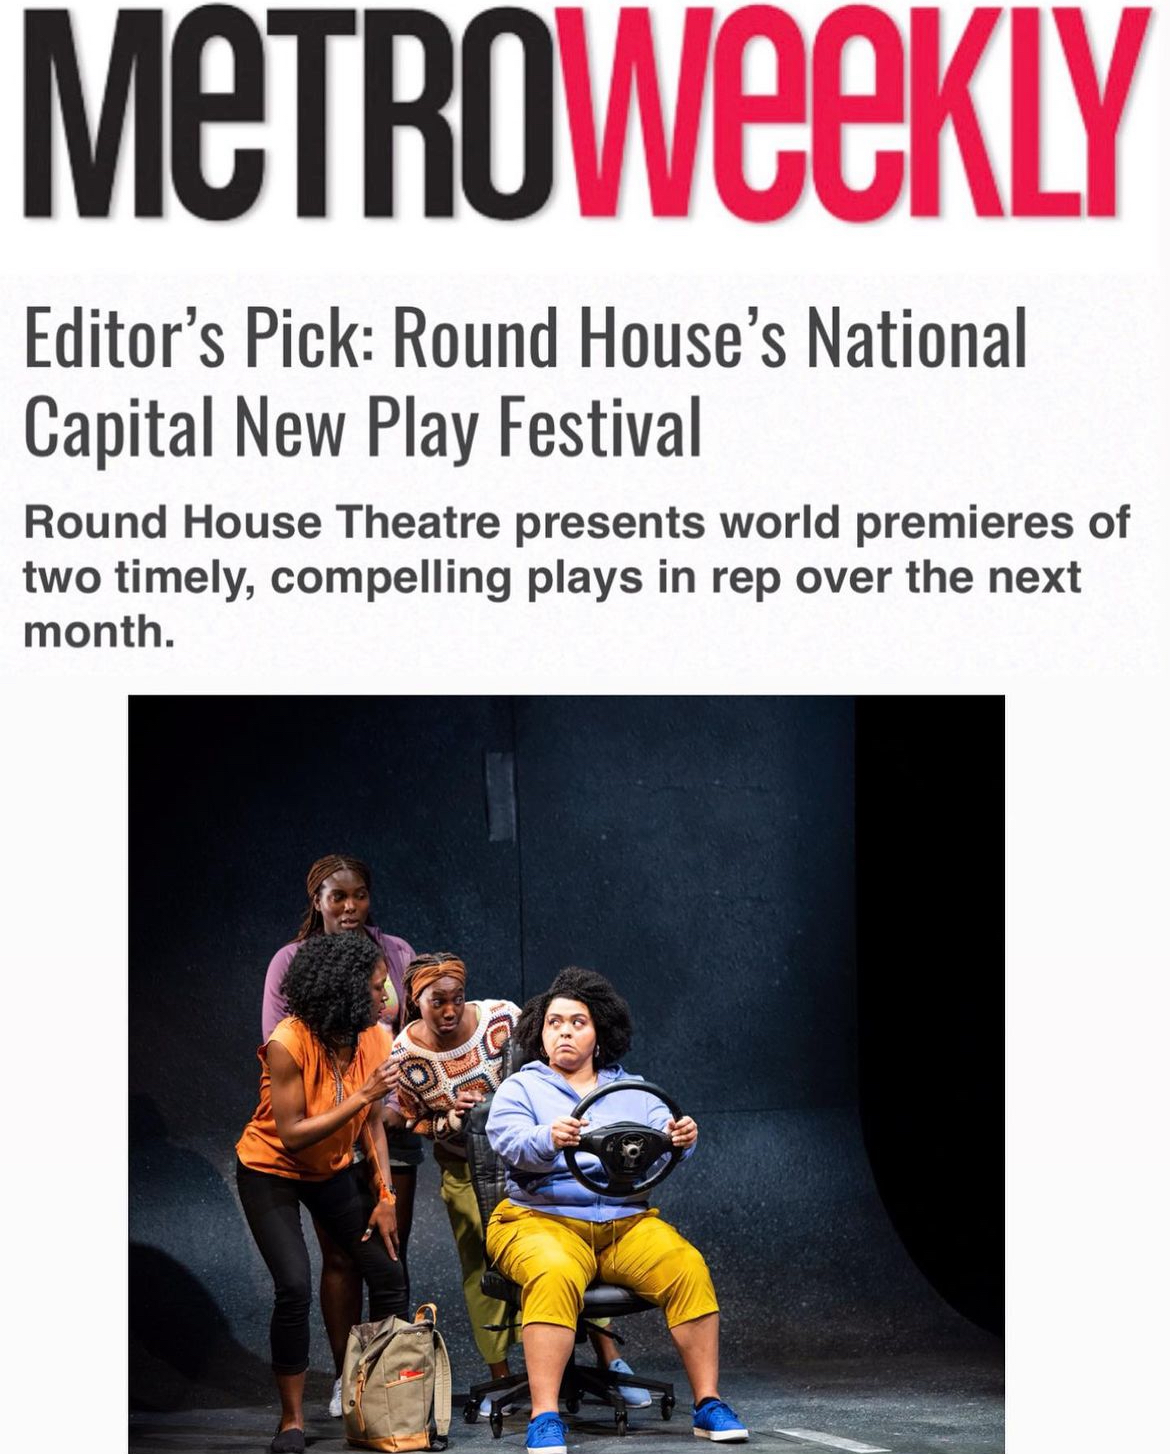 Metro Weekly Editor's Pick: Round House's National Capital New Play Festival